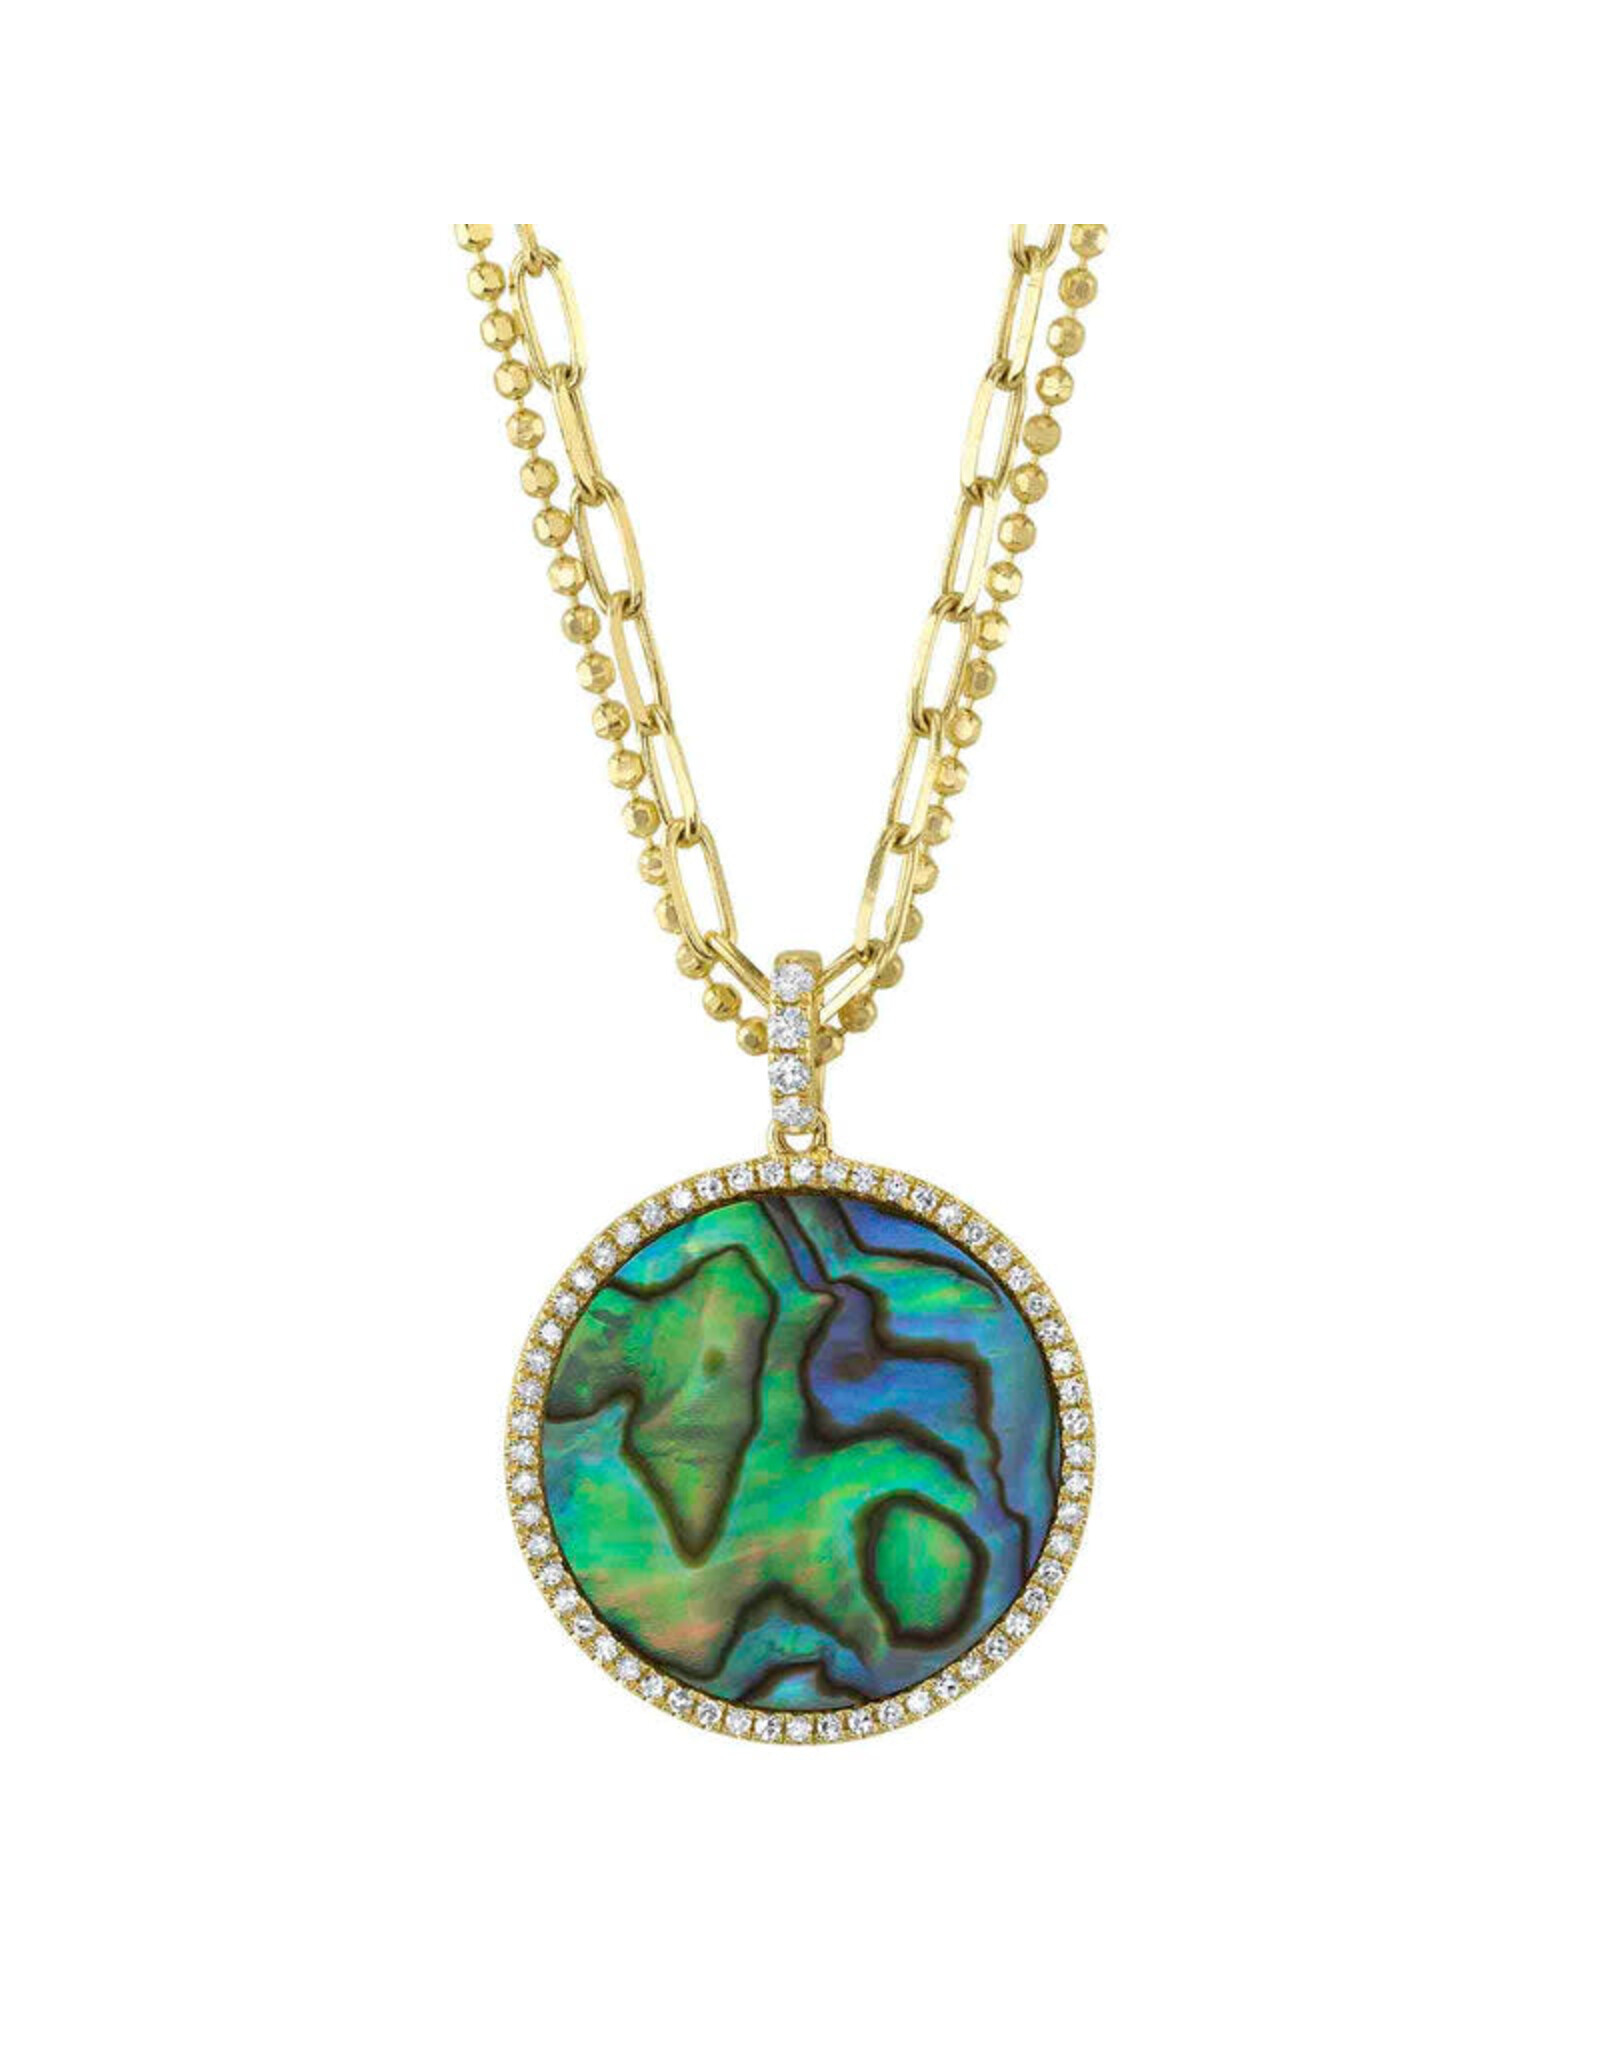 14K Yellow Gold Abalone and Diamond Circle Necklace, AB: 2.91ct, D: 0.20ct